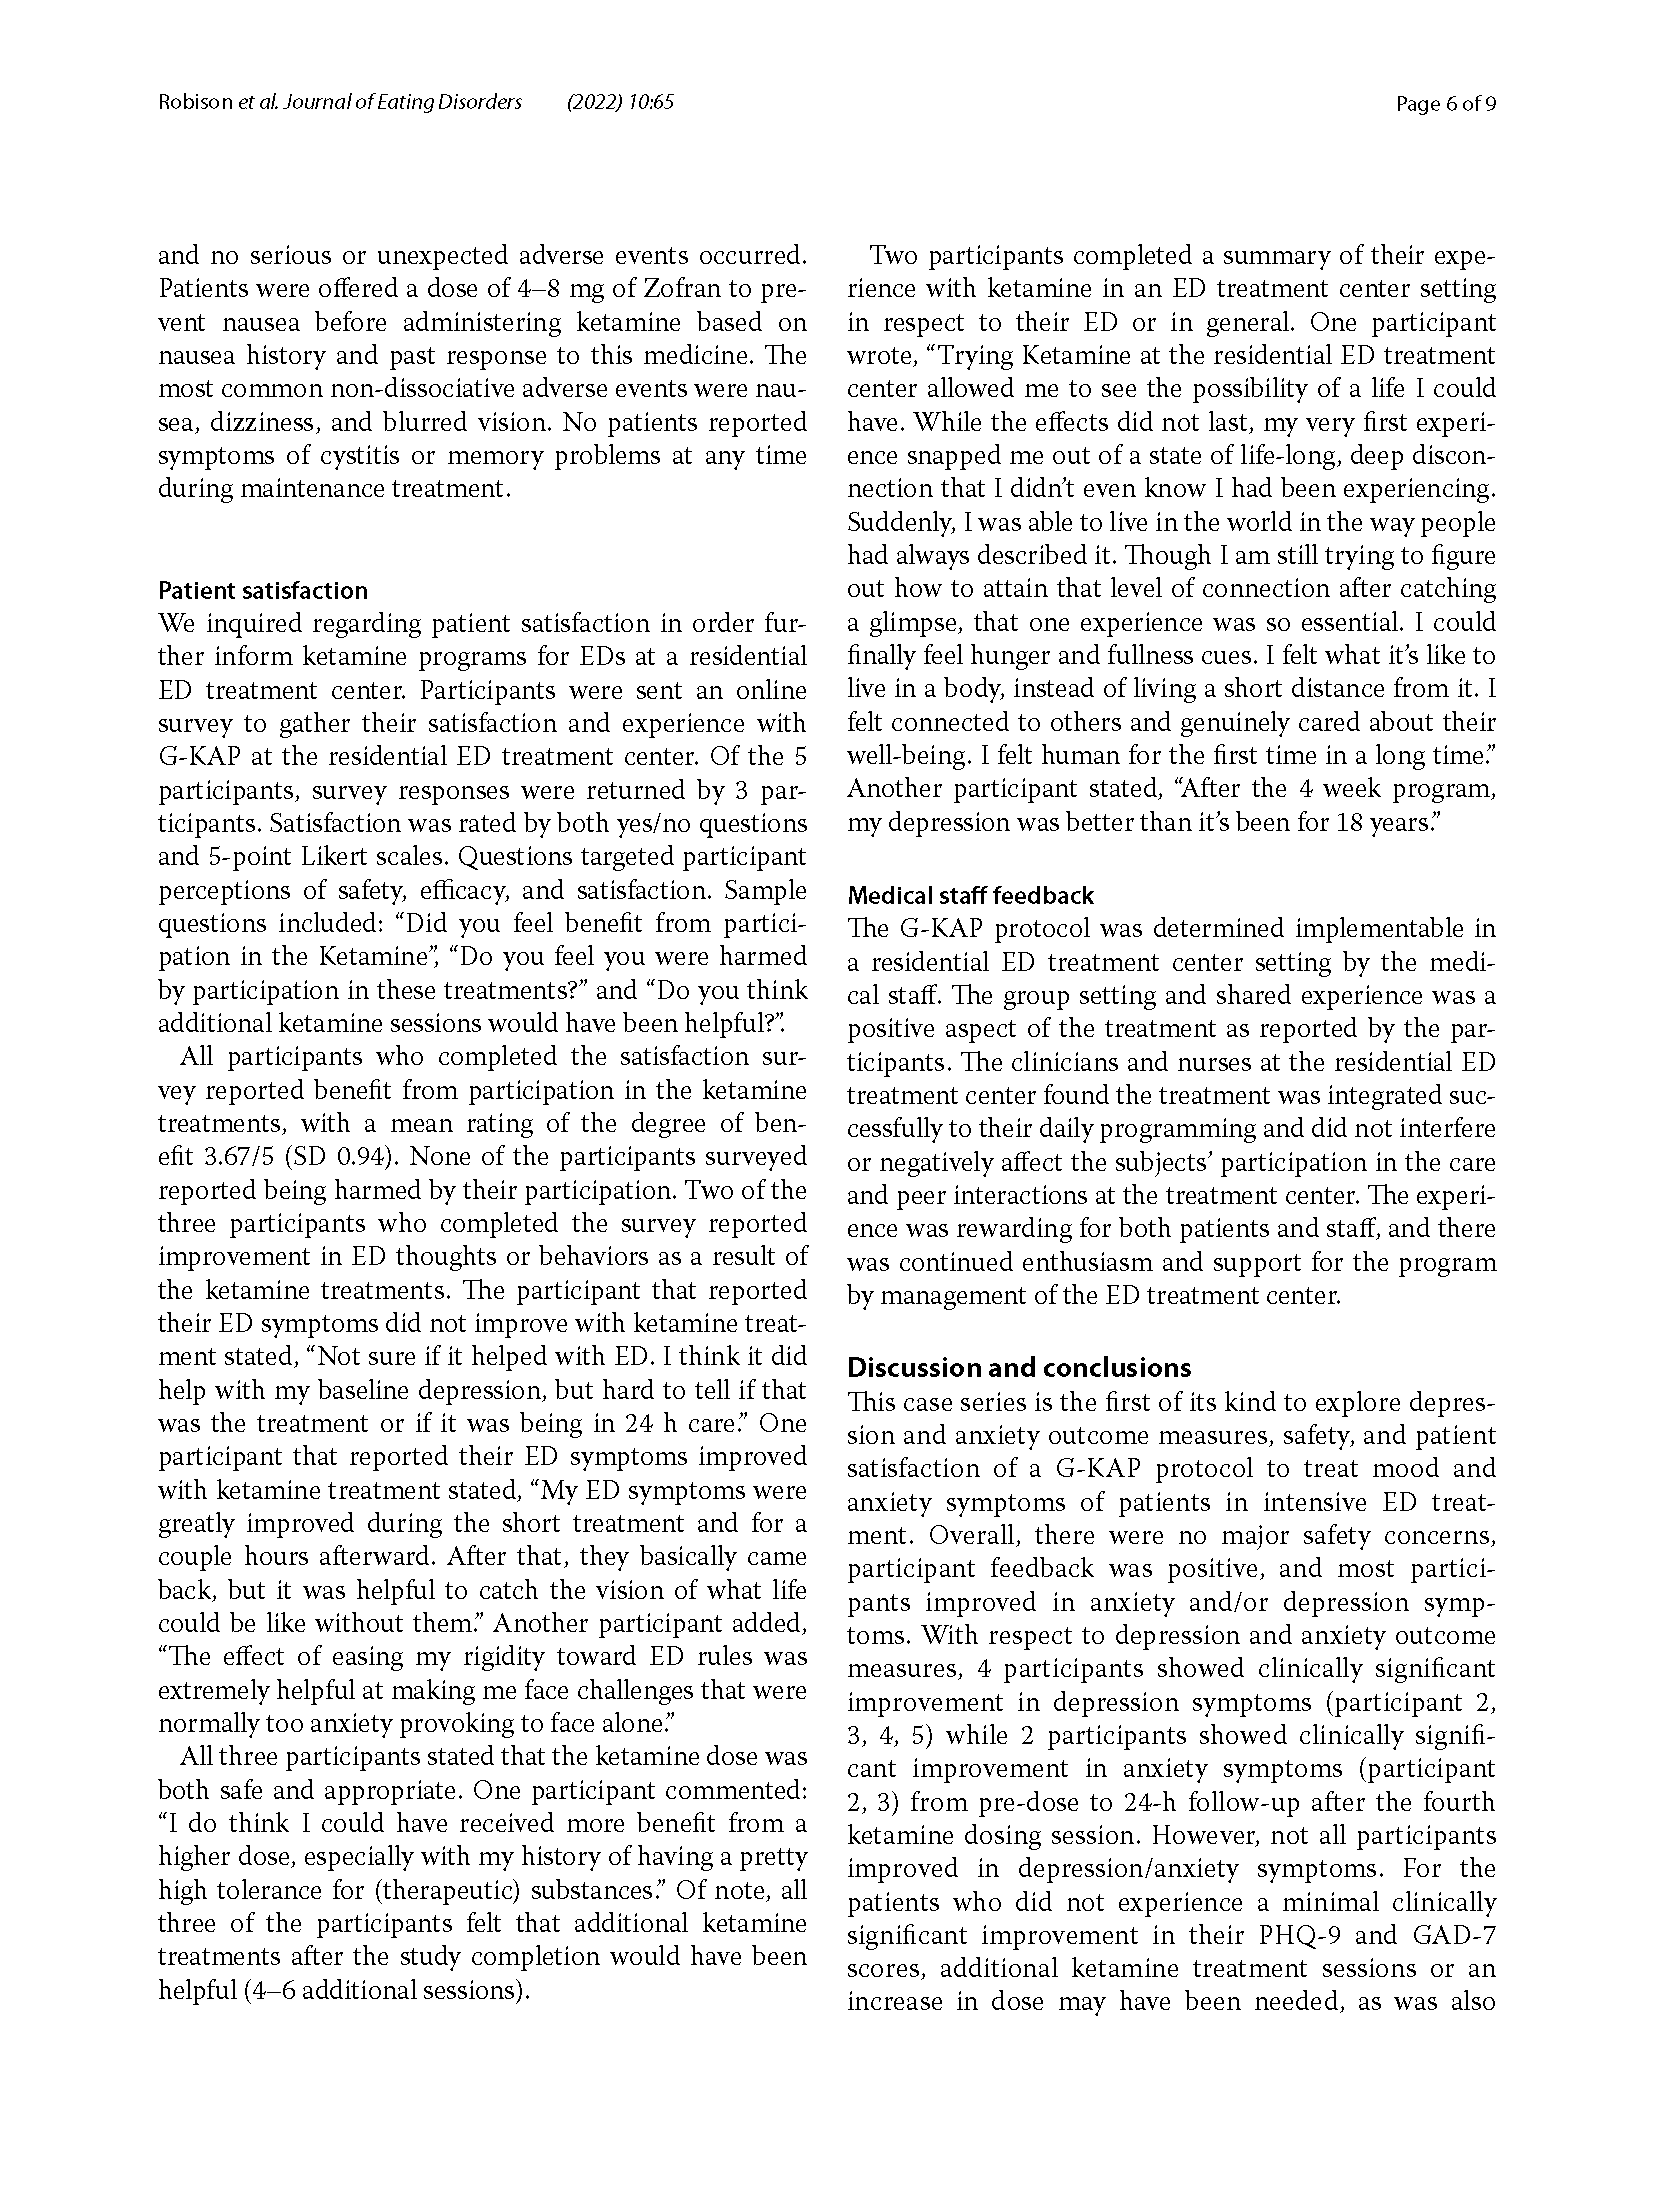 Group-based ketamine-assisted psychotherapy for patients in residential treatment for eating disorders with comorbid depression and anxiety disorders_Page_6.png